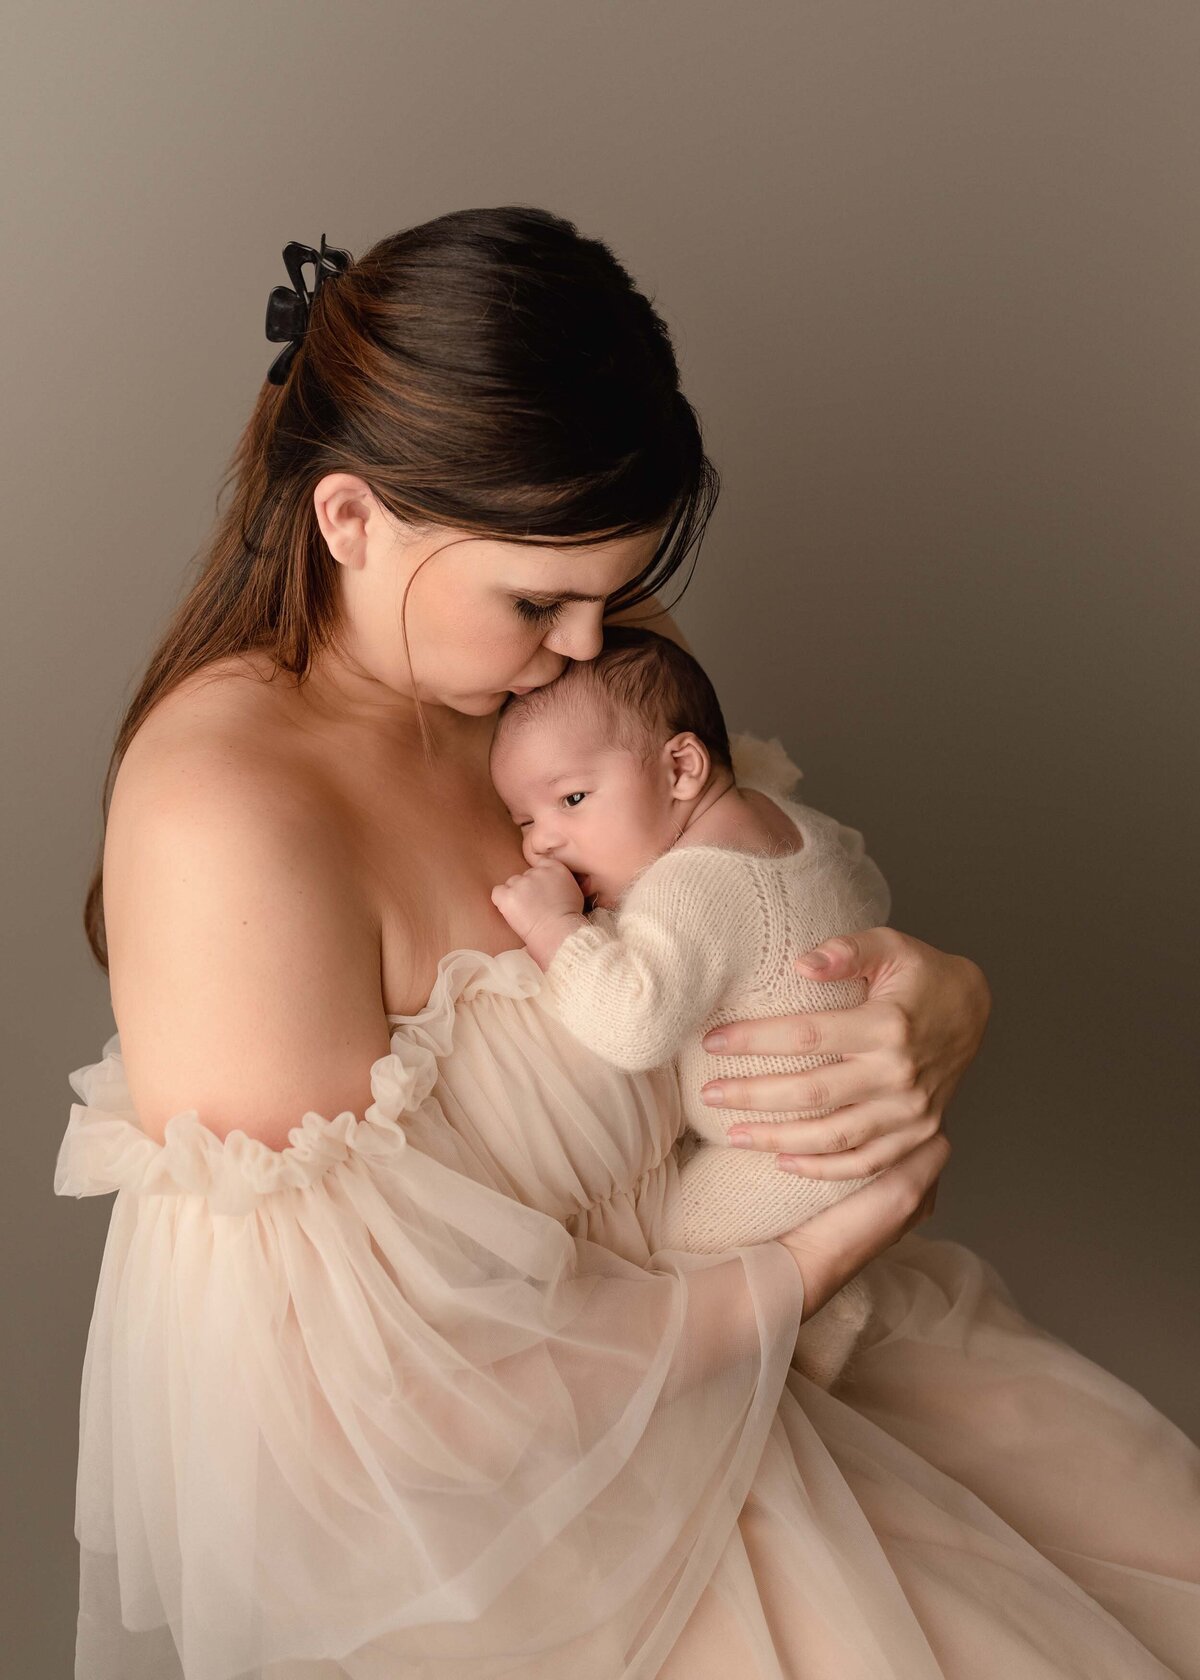 Newborn photoshoot. Mom is wearing an off-the-shoulder organza gown and holding her baby boy against her chest. Mom is giving baby a kiss atop of his head. Captured by best Murrieta newborn photographer Bonny Lynn Photography.